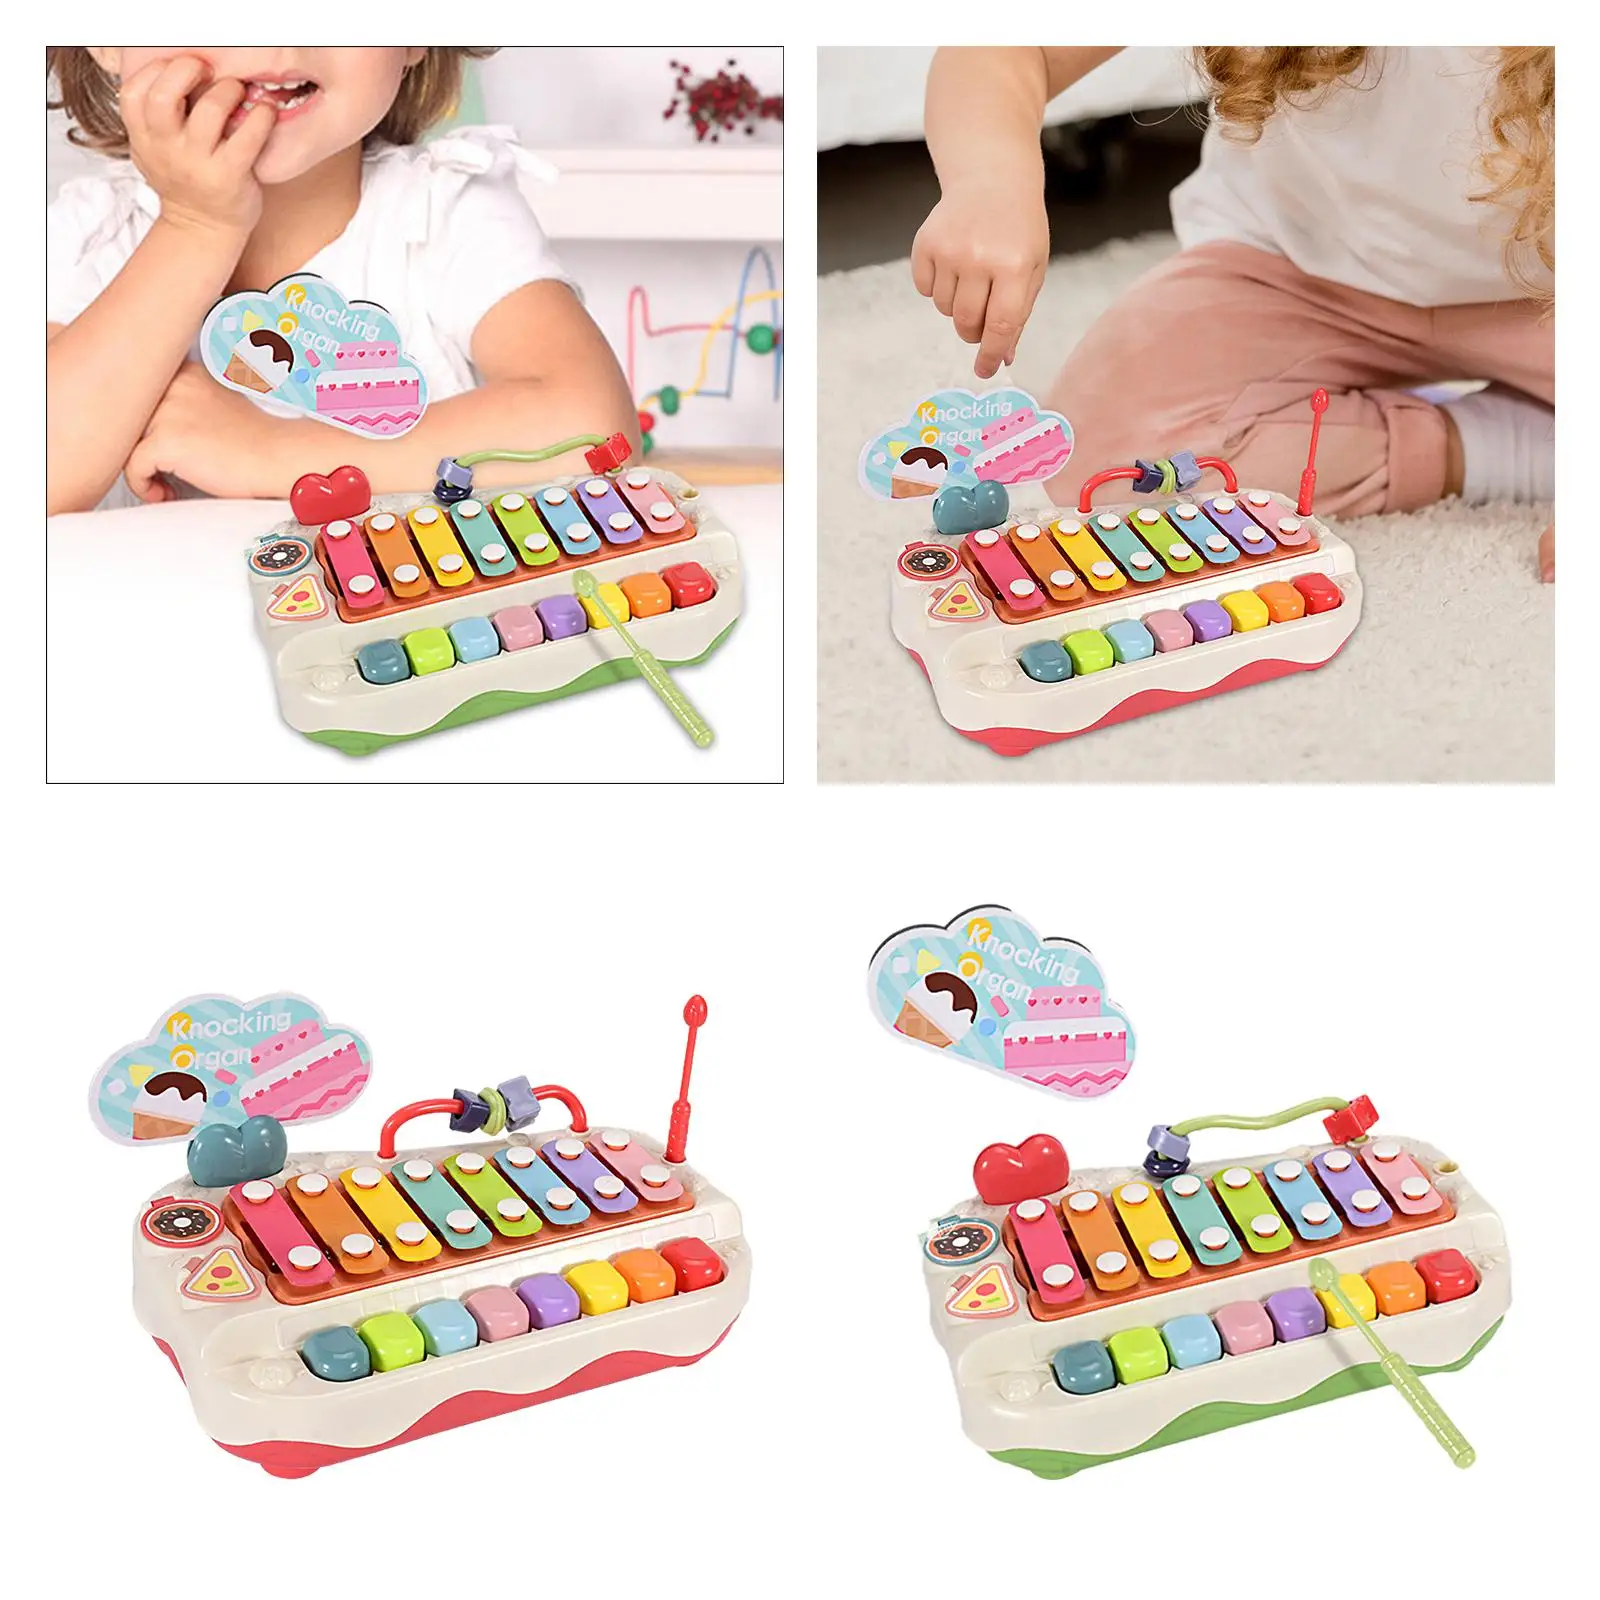 Baby Musical Toy Educational Eight Tone Montessori Musical Instrument Toy for Baby Boy Girls Kids 3+ Toddler Birthday Gift